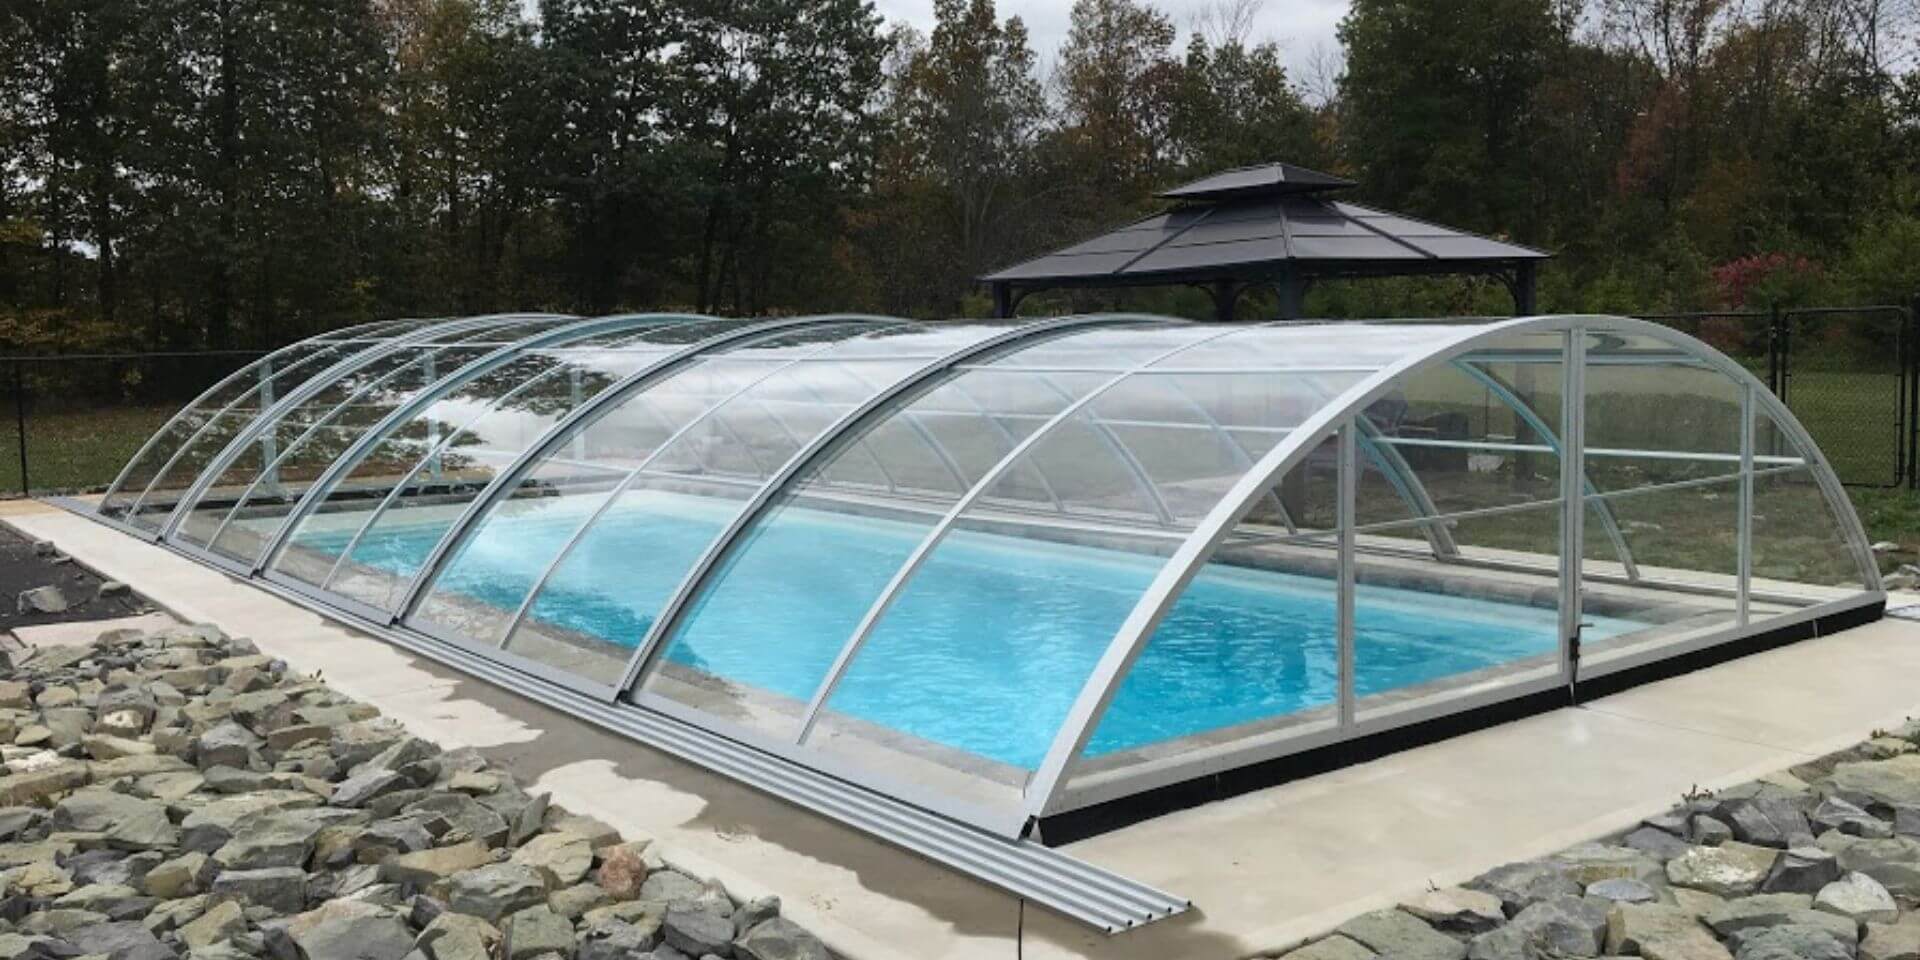 10 Hidden Secrets Why You Should Buy Swimming Pool Dome Covers - ExcelitePlas